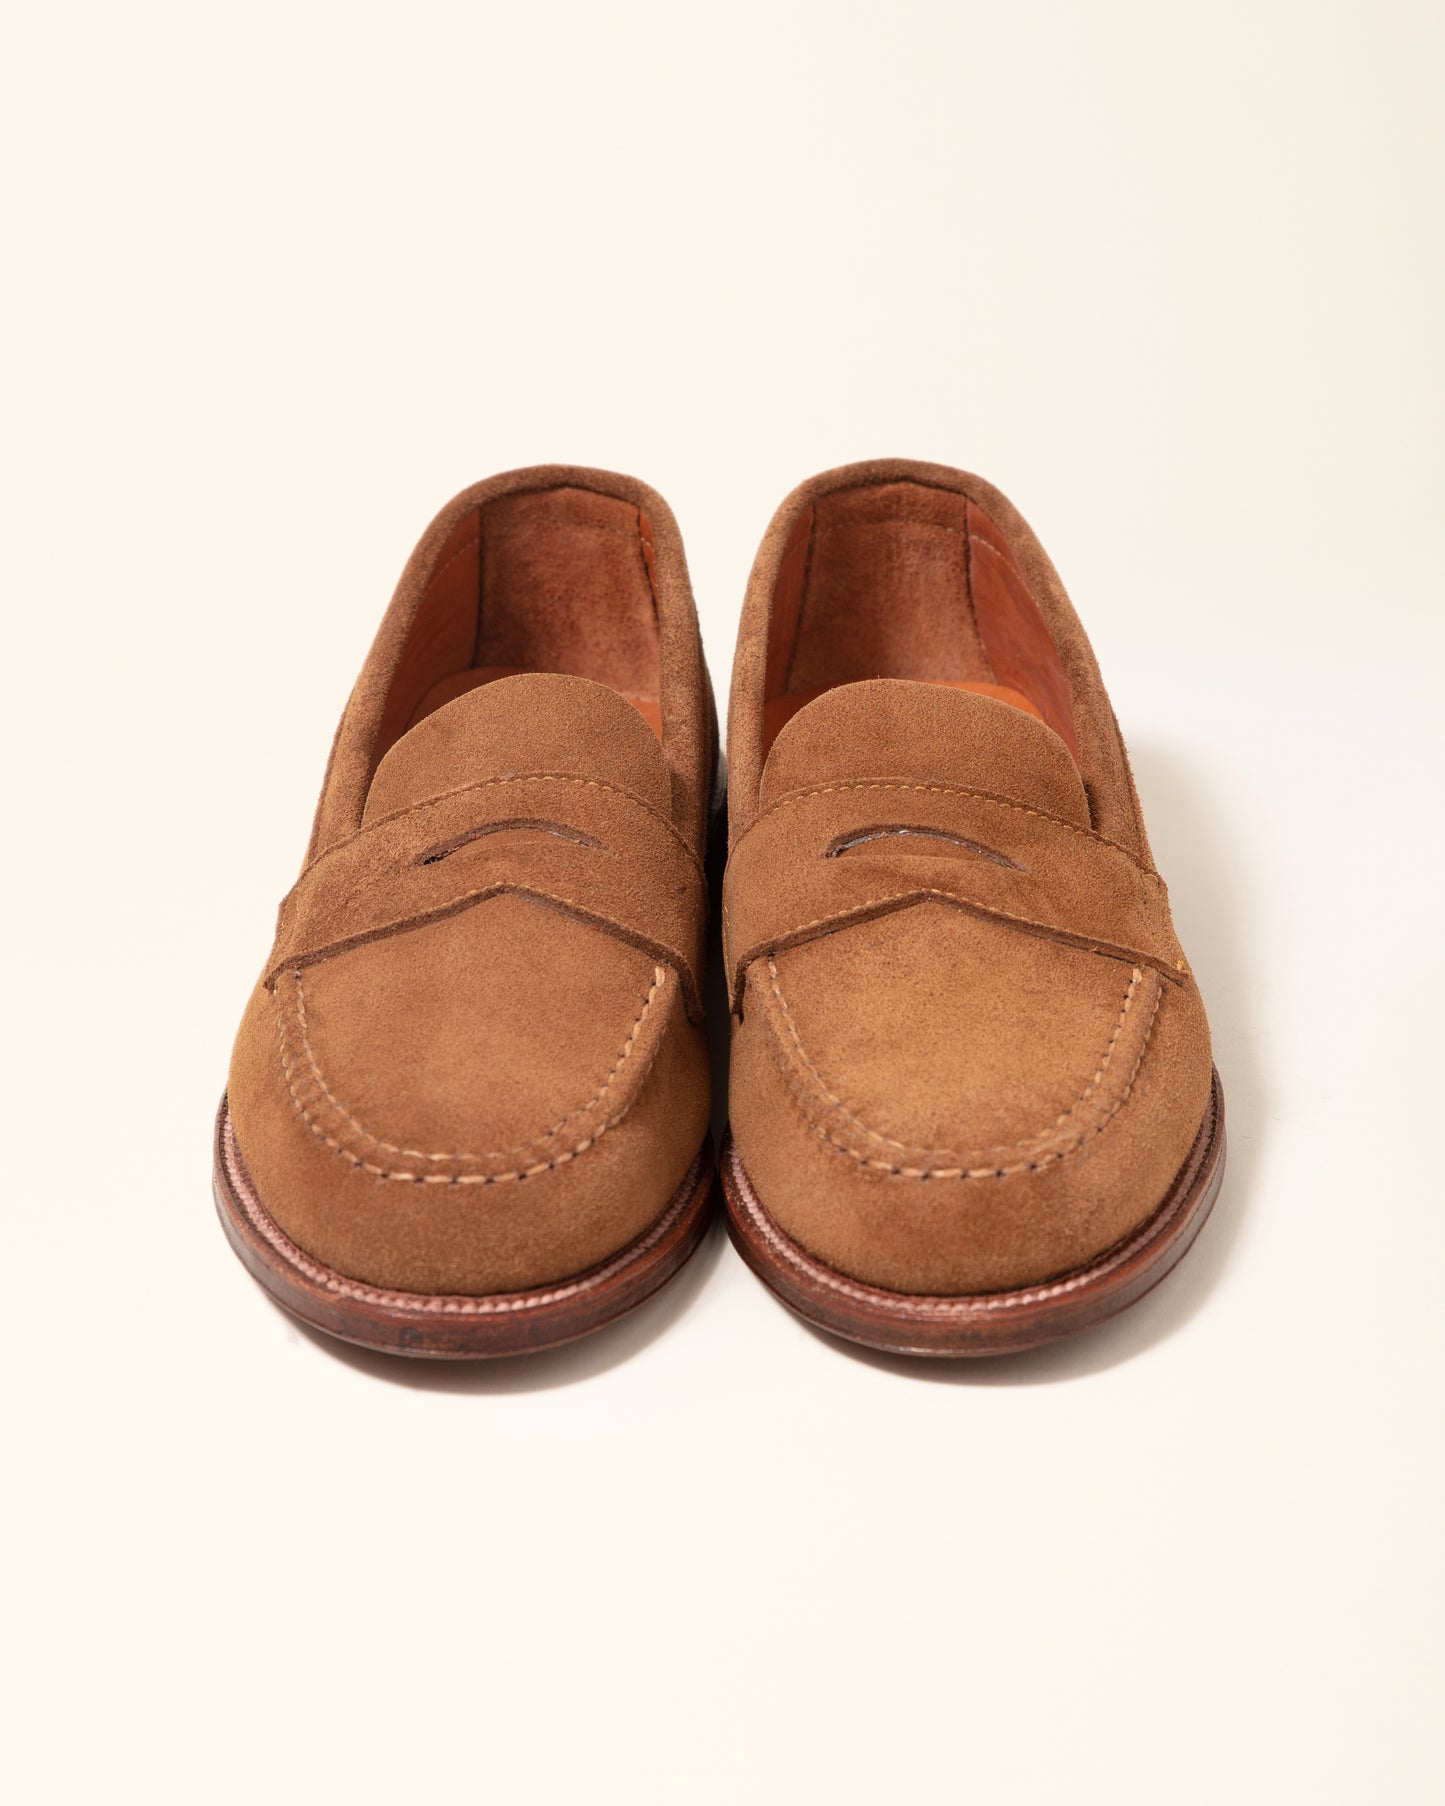 6243F Unlined Leisure Handsewn Penny Loafer in Snuff Suede, Van Last